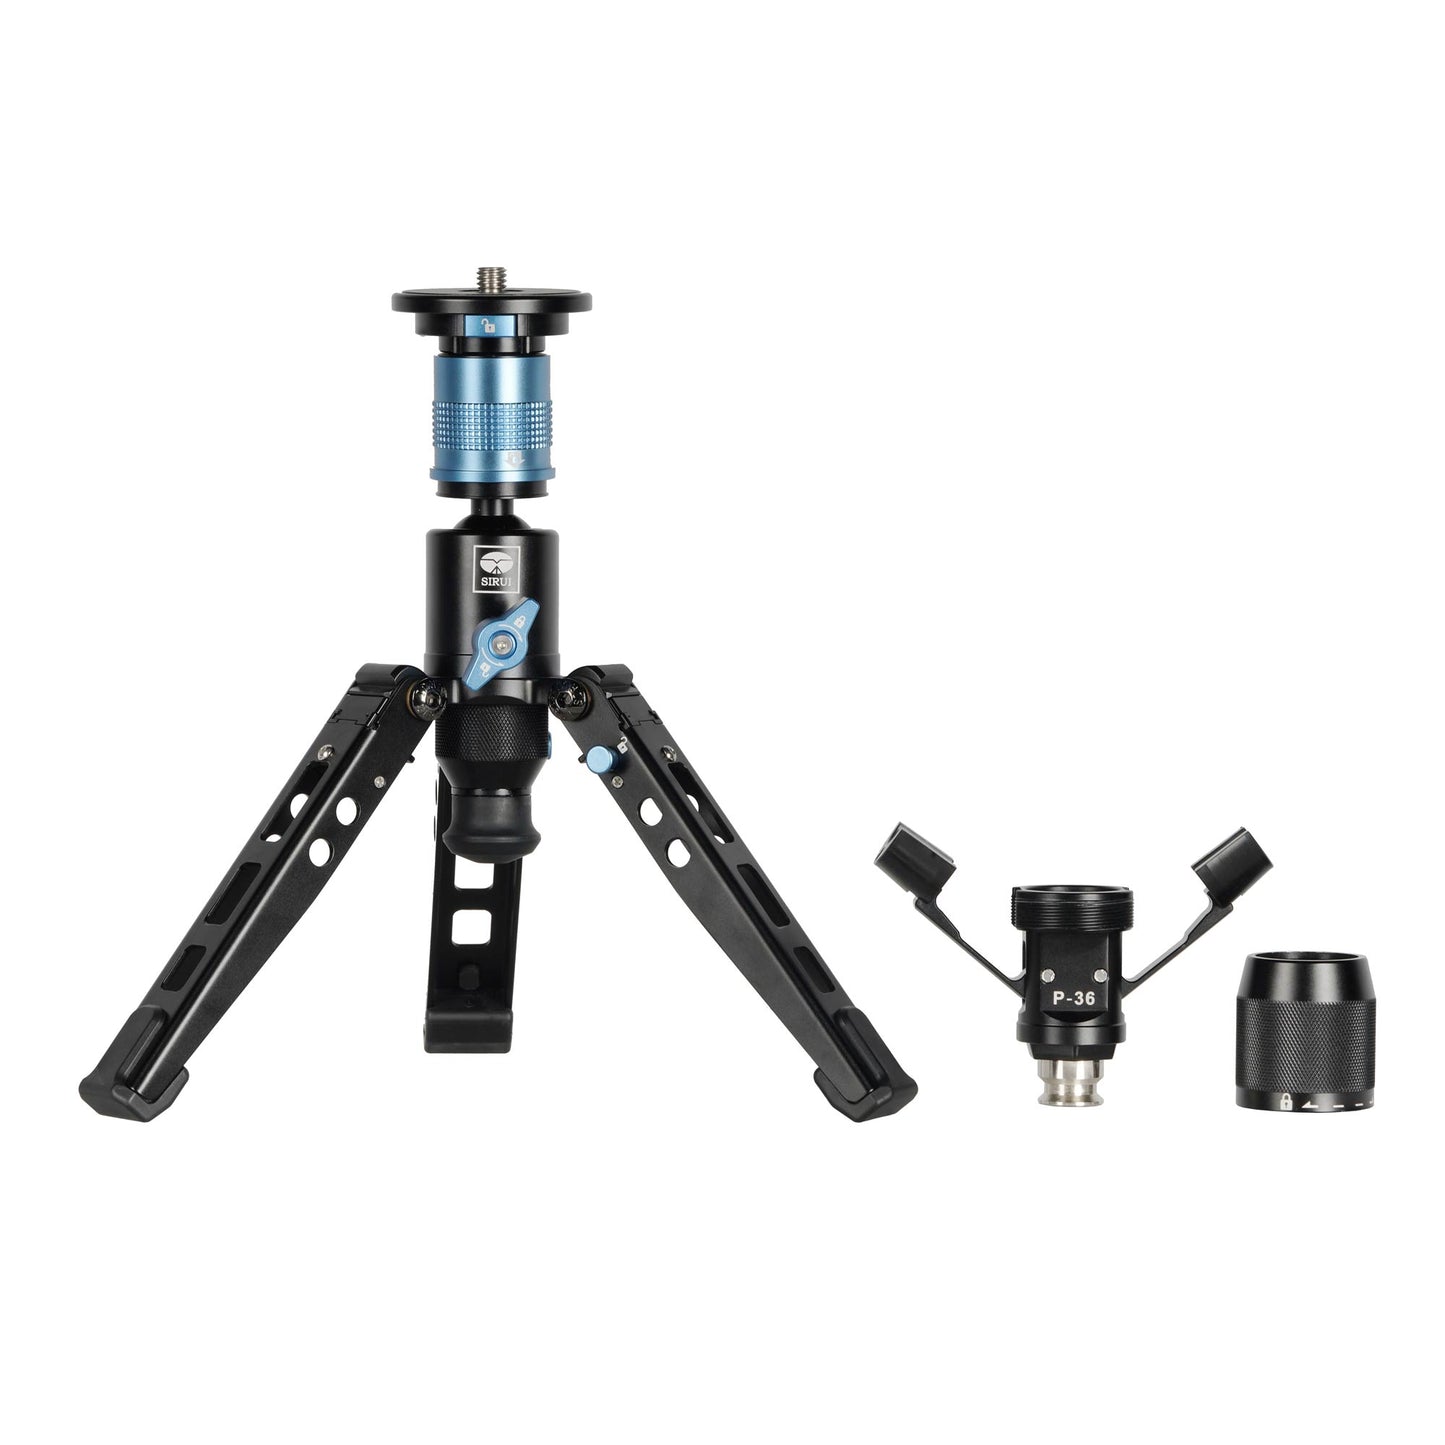 SIRUI P-36 Kit Standspinne + Adapter f¨¹r P-306, P-326, AM-306, AM-326